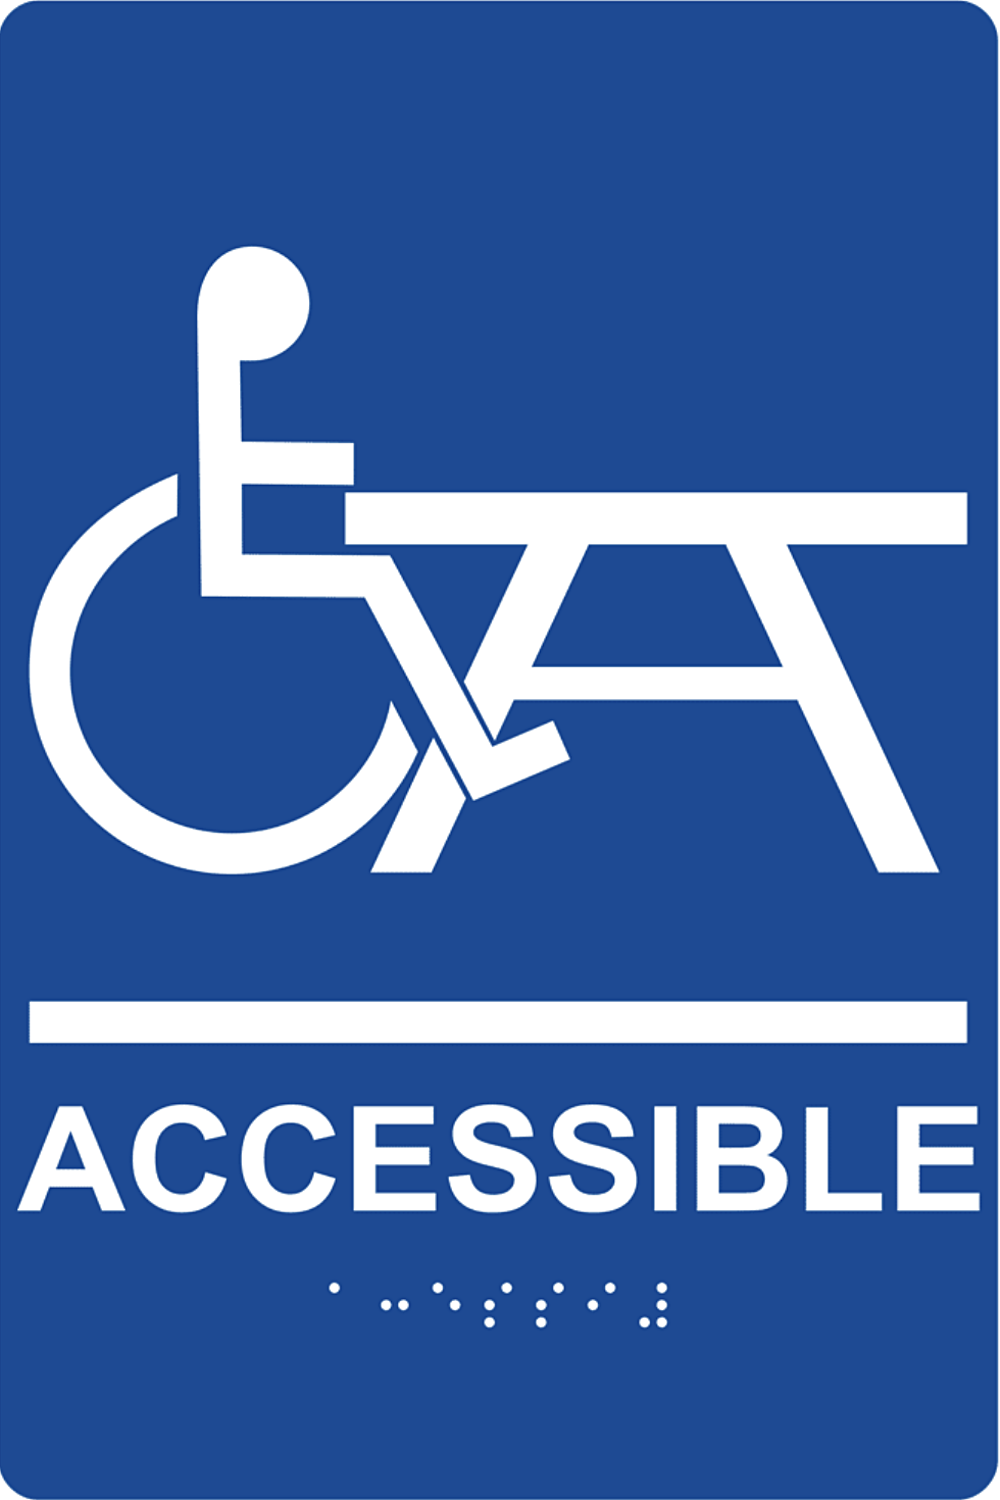 Compliance Signs, a major maker of regulatory-compliant safety signs and labels and parking signs, tells the ADA story with this accessible table marker.